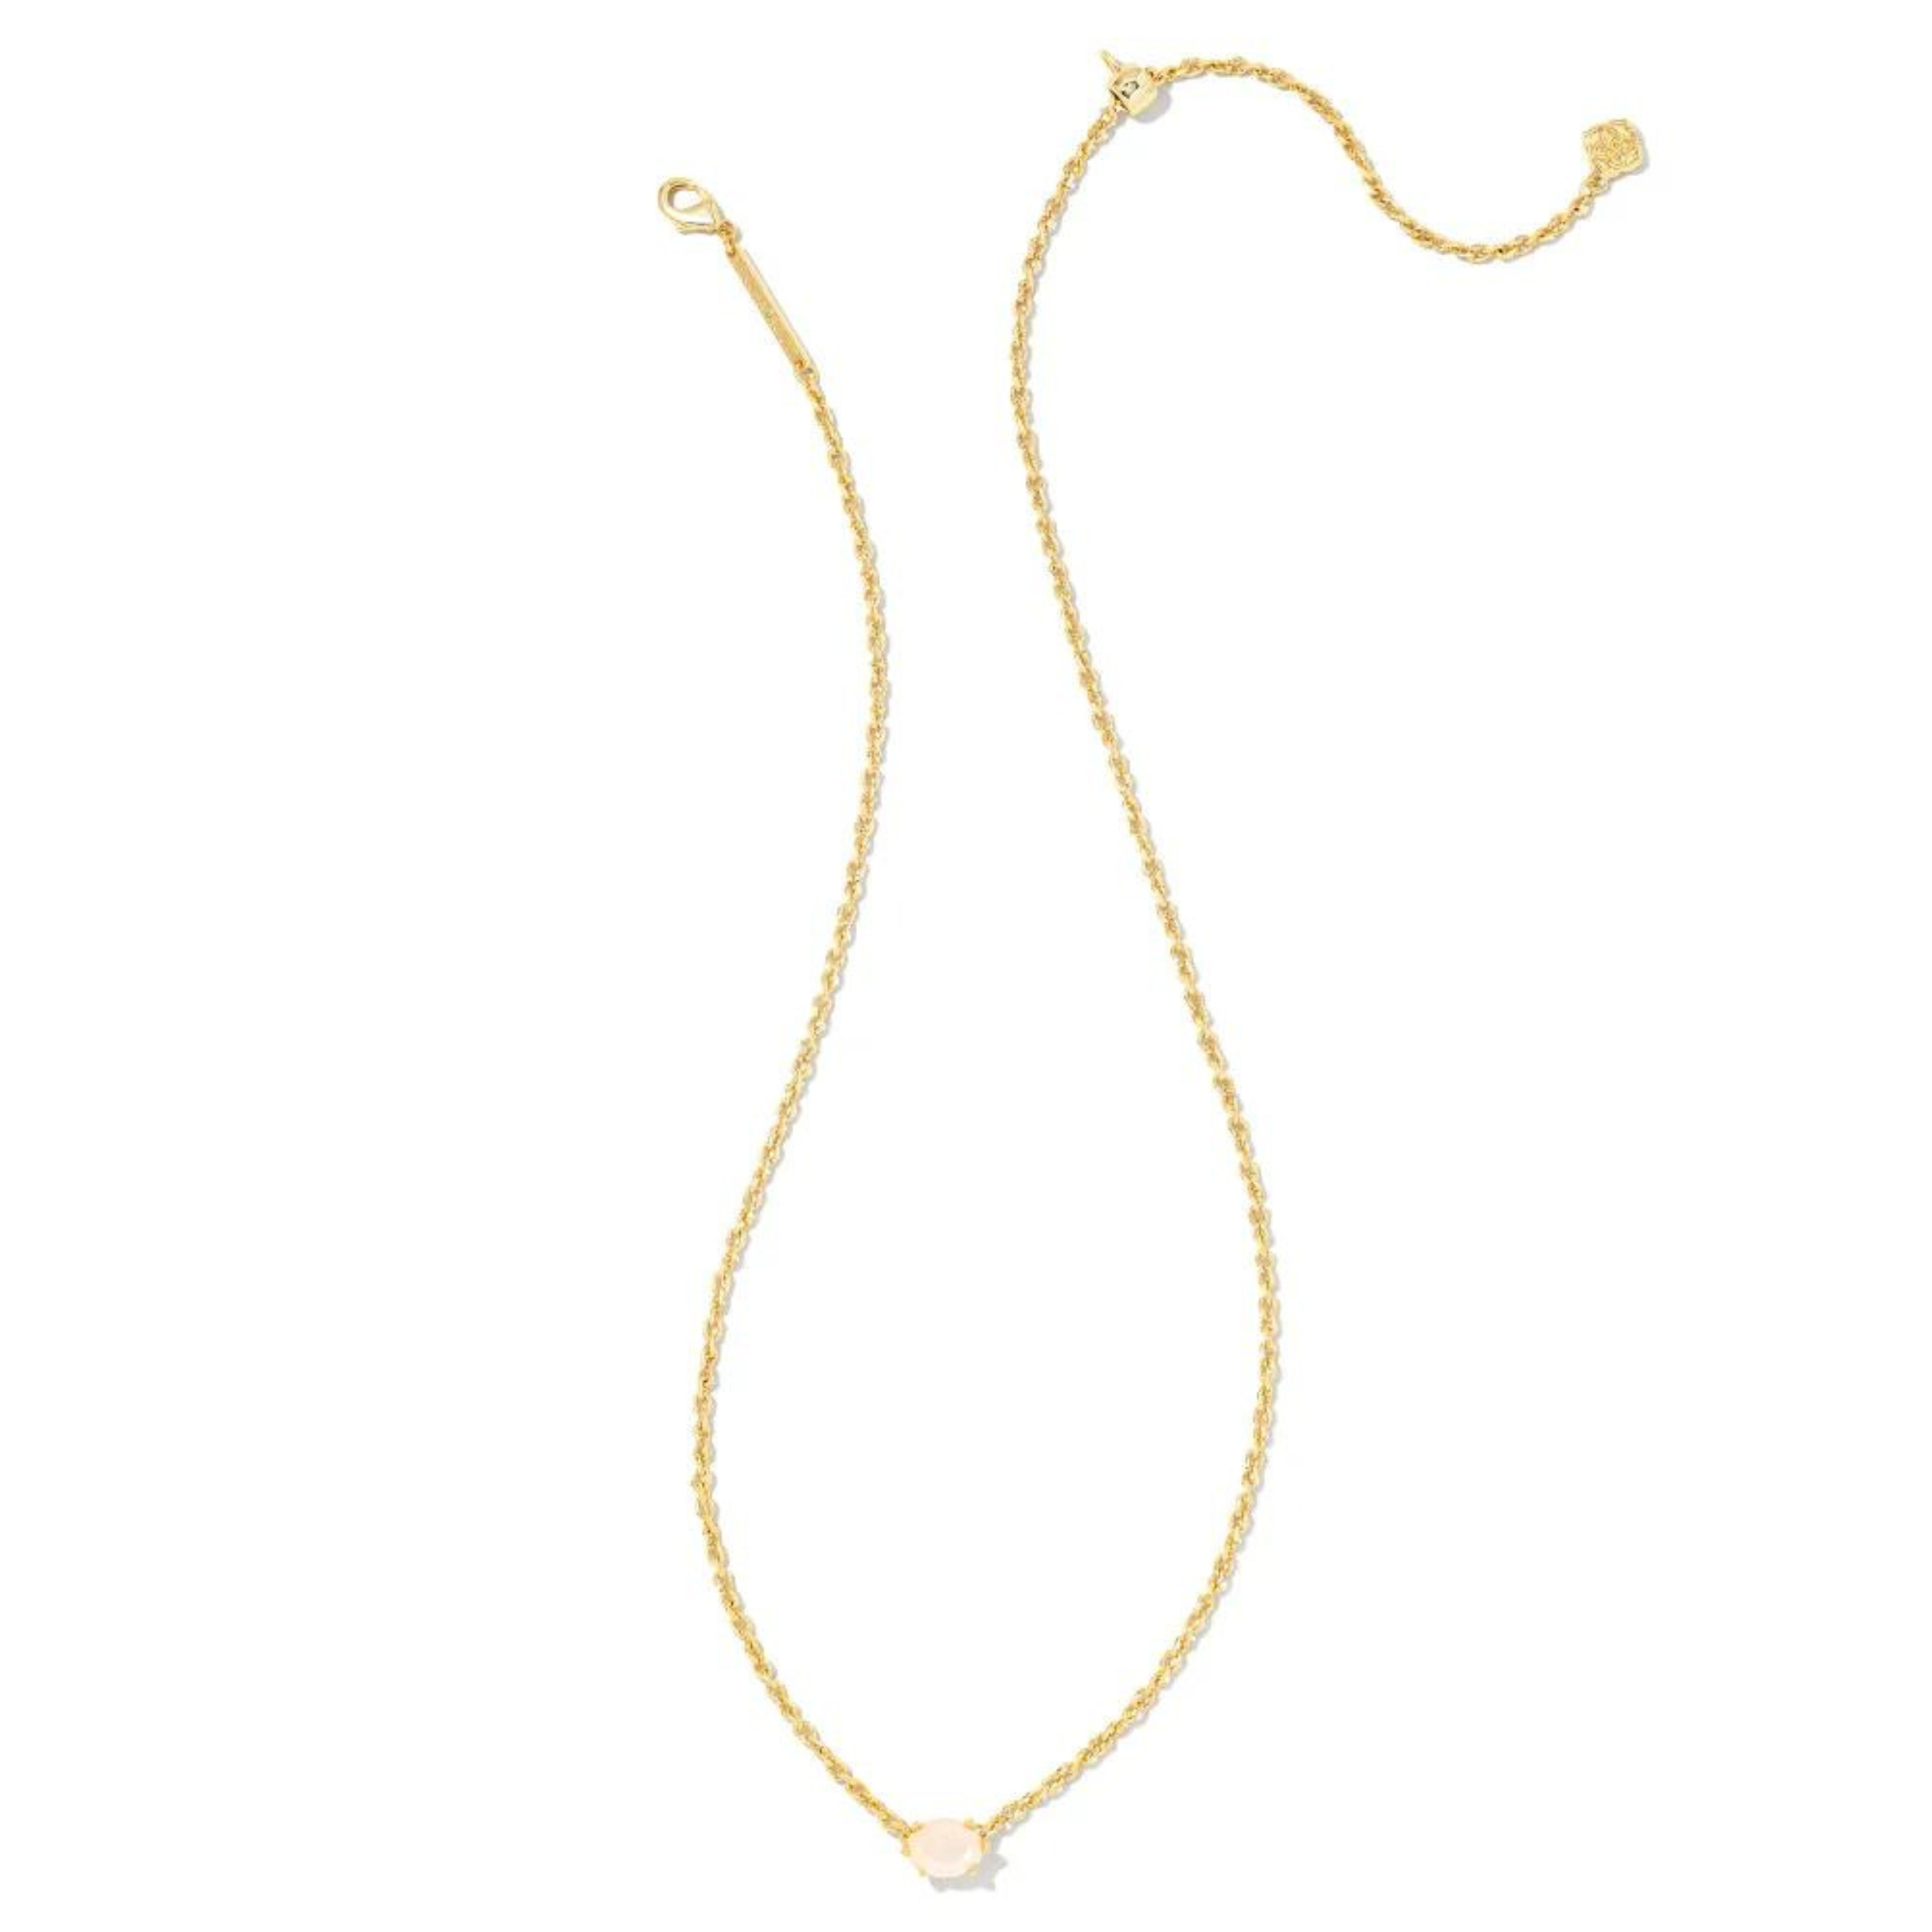 Kendra Scott | Cailin Gold Pendant Necklace in Champagne Opal Crystal - Giddy Up Glamour Boutique